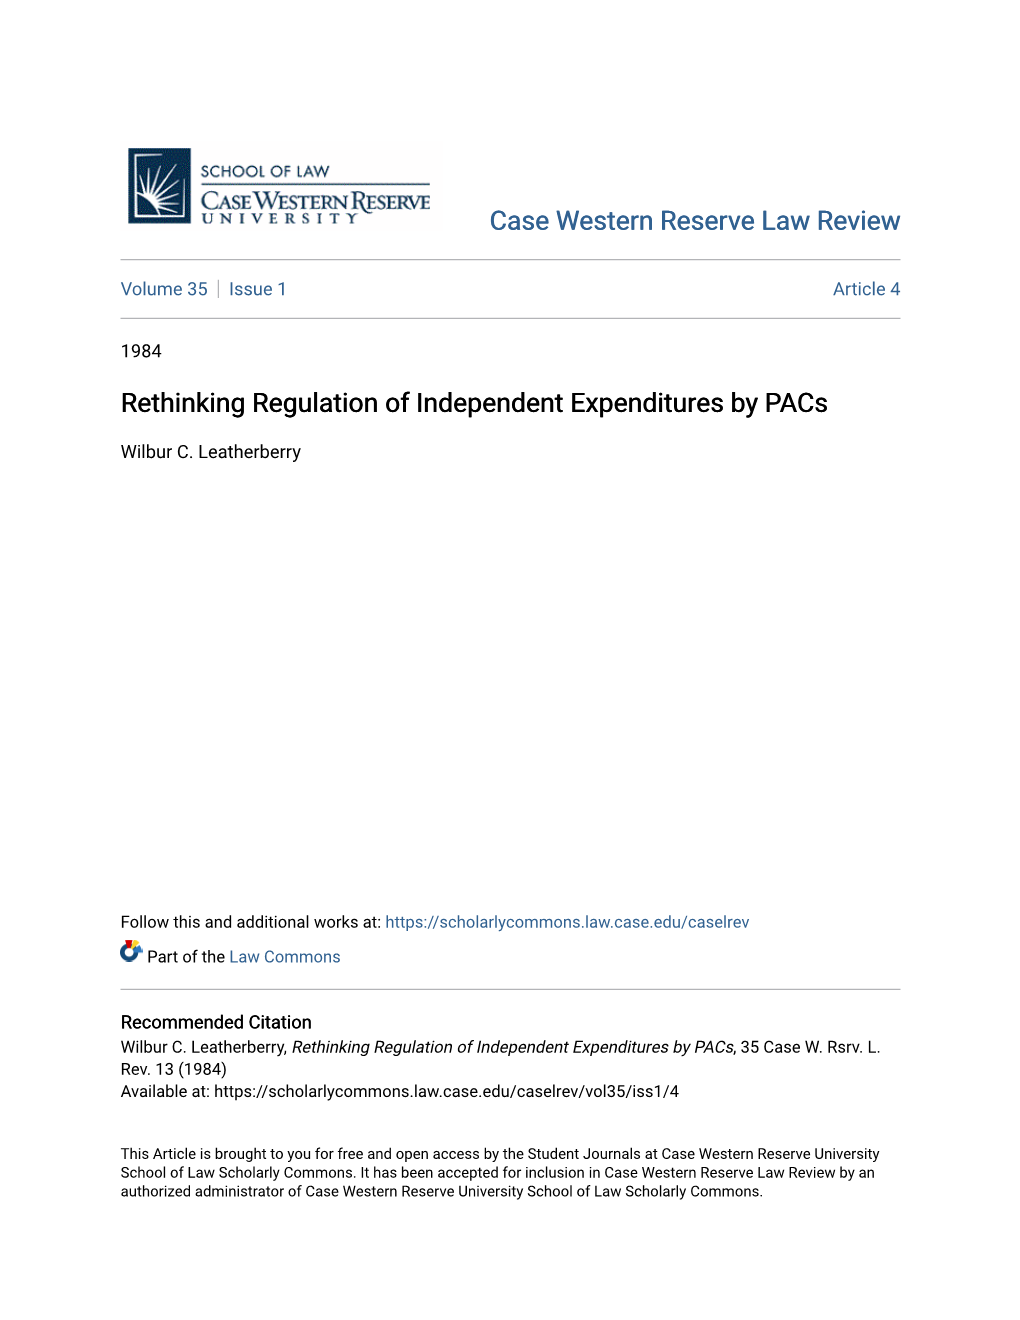 Rethinking Regulation of Independent Expenditures by Pacs